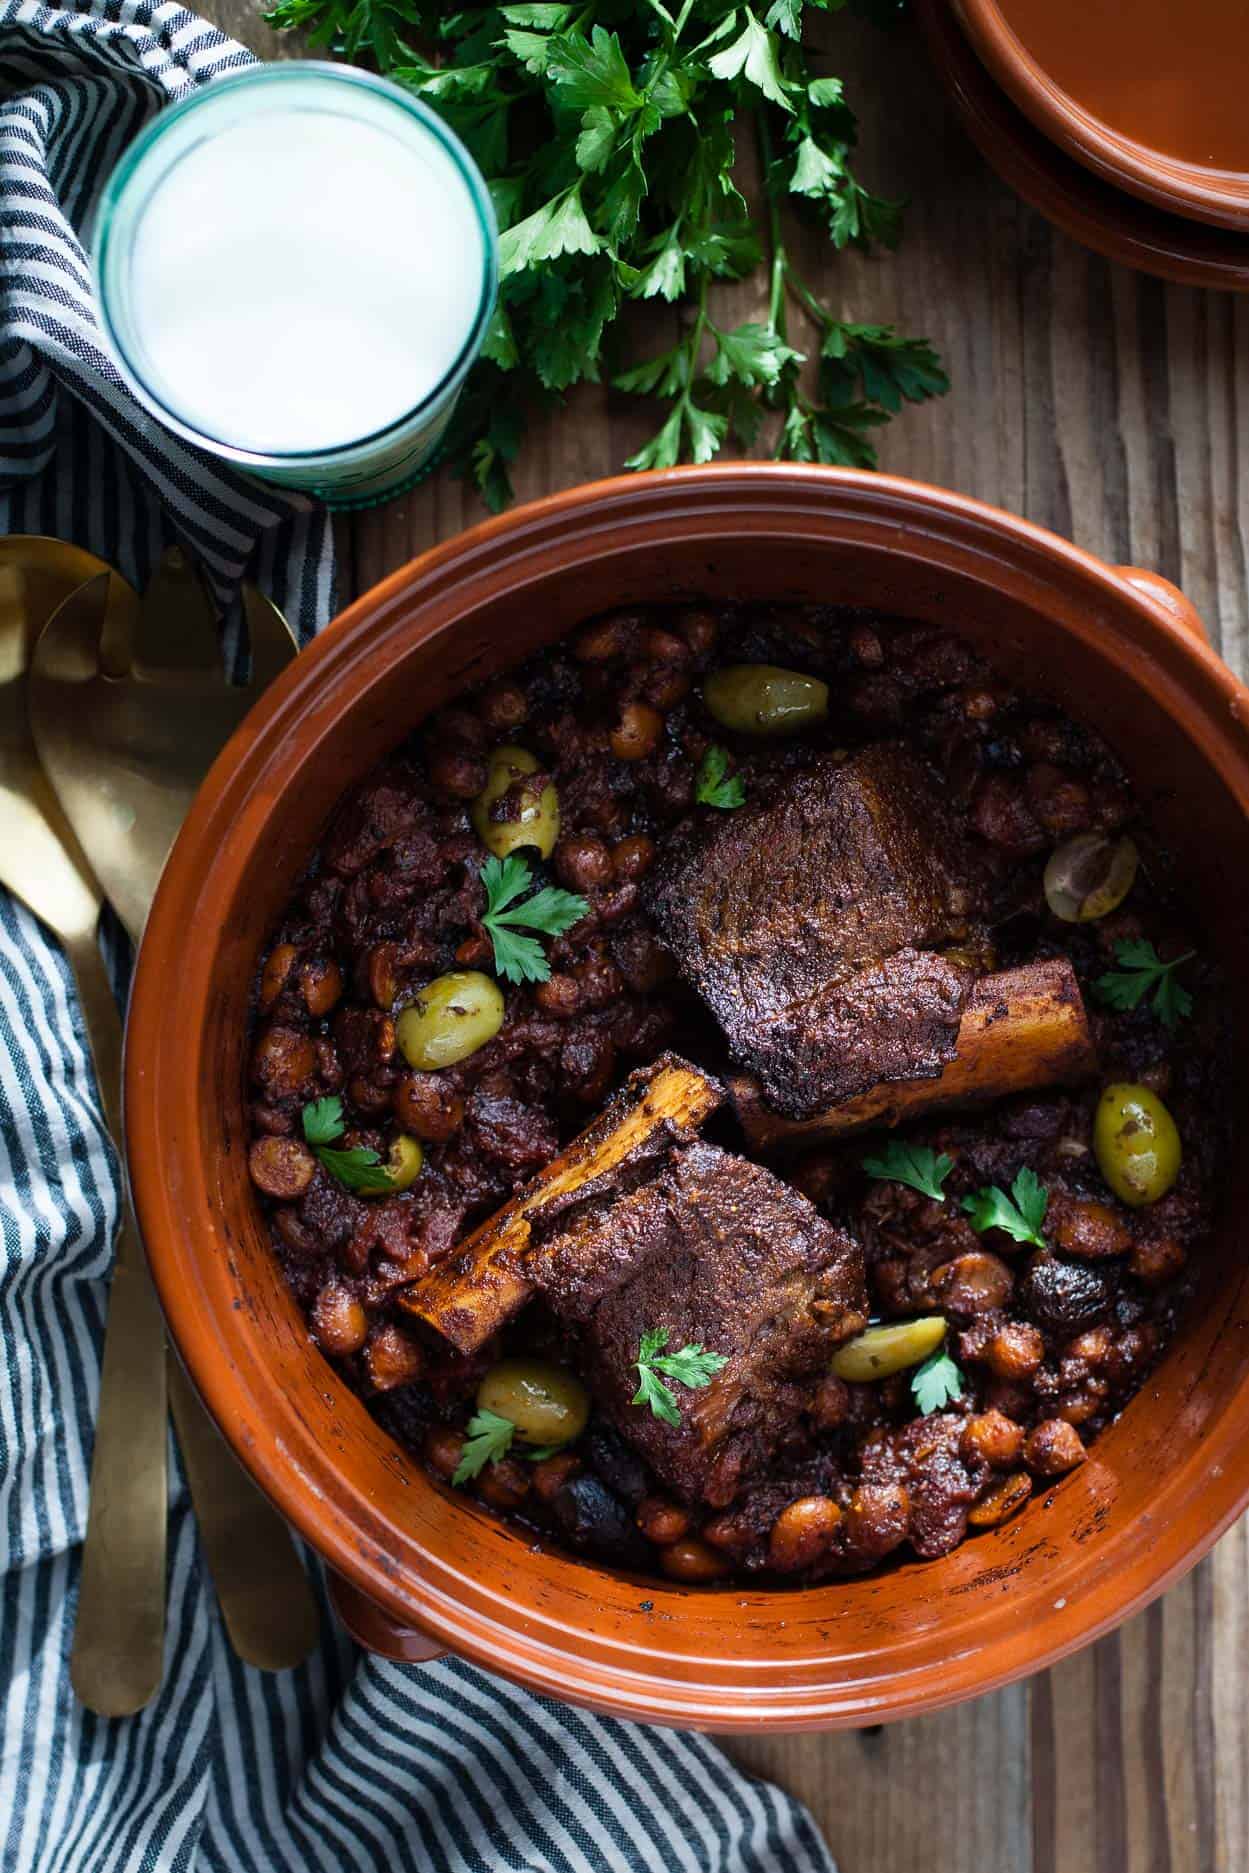 Braised Short Rib Tagine with Figs & Almonds